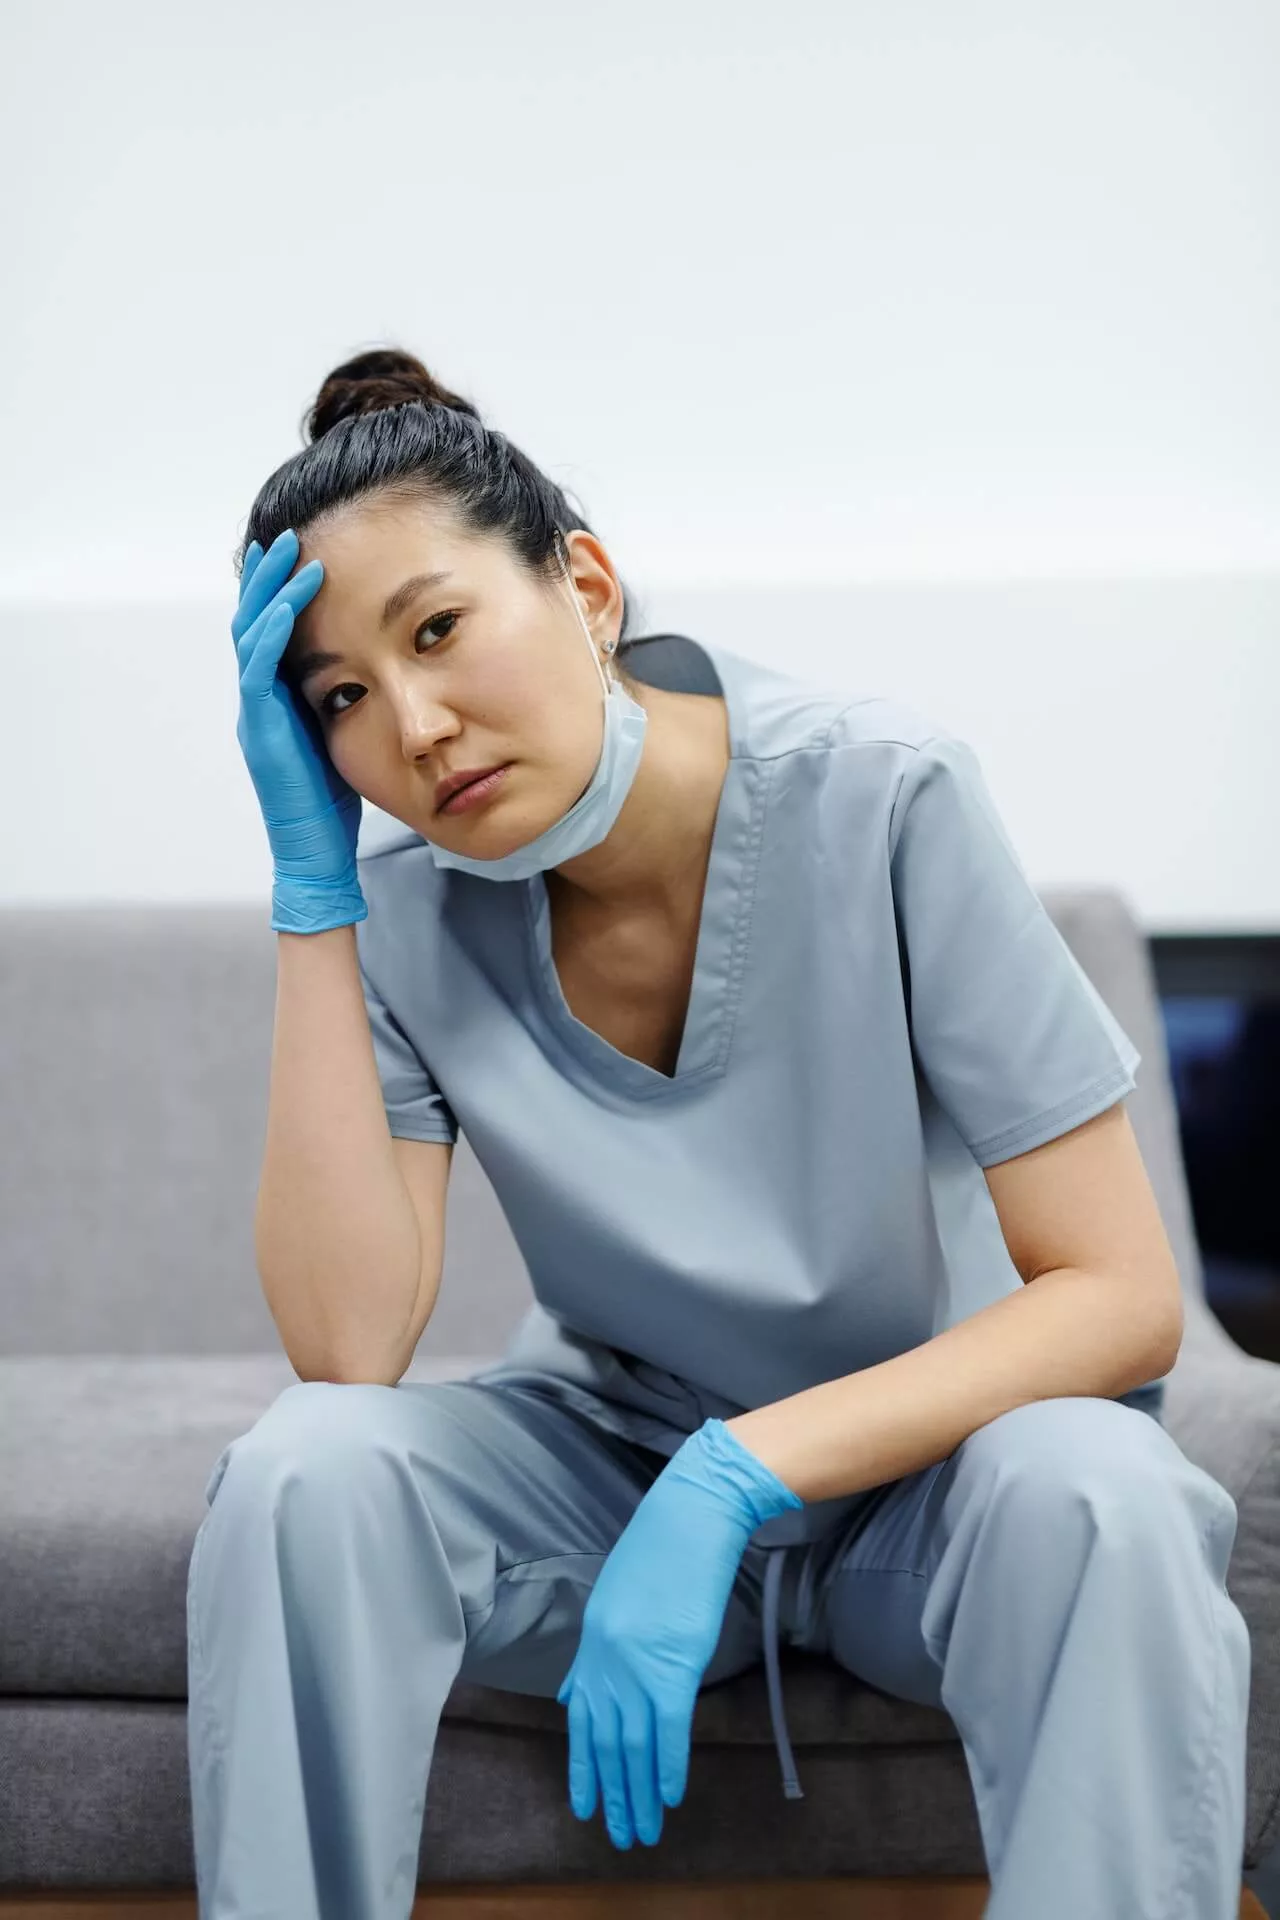 How Sleep Deprivation Affects Surgeons